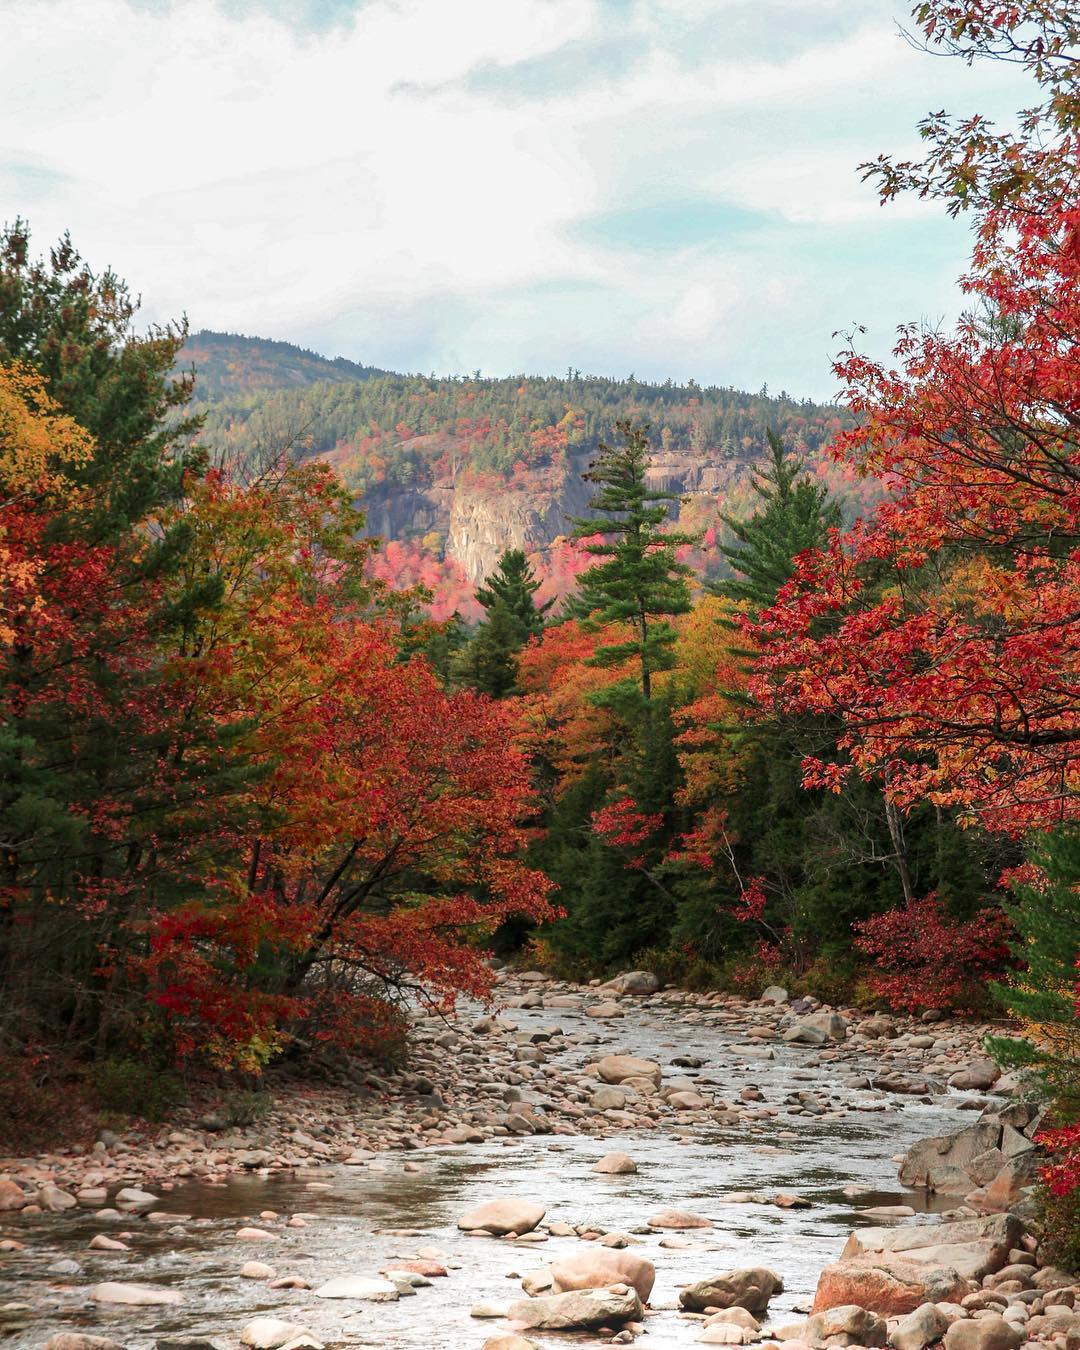 River and Forest in the Fall in Lincoln, NH. Photo by Instagram user @tononphoto